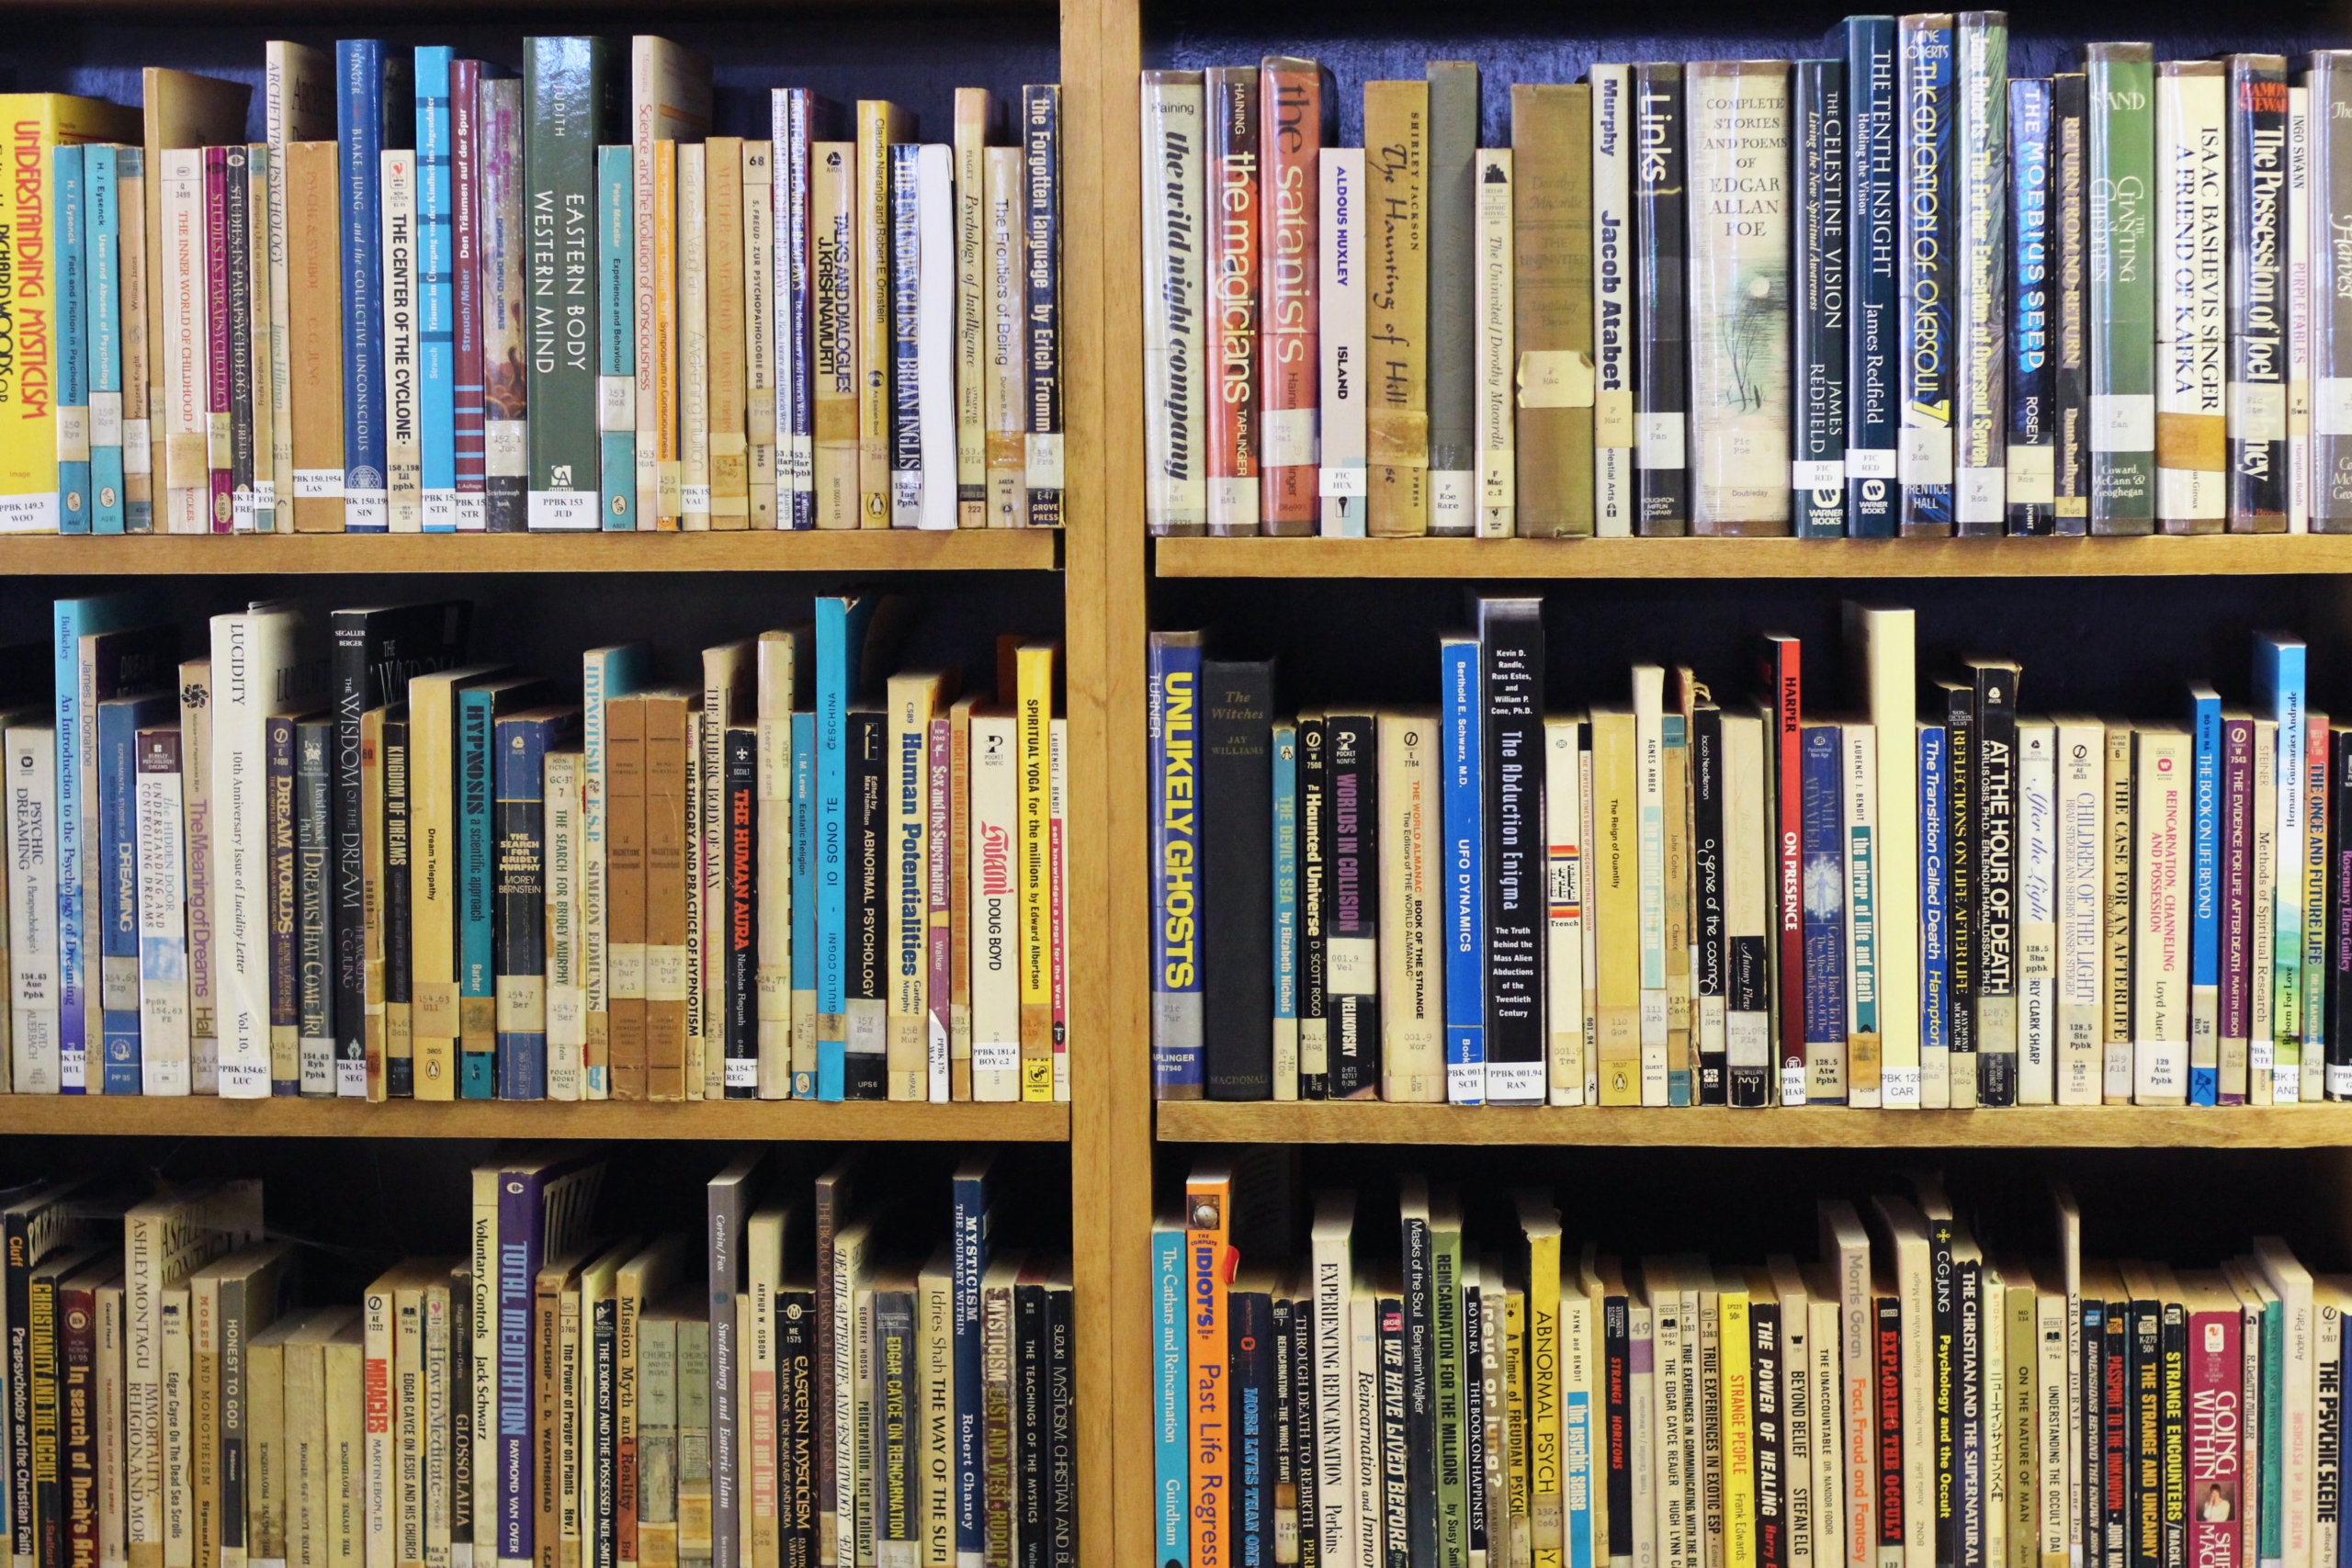 Books on a variety of subjects at the Eileen J. Garrett Library